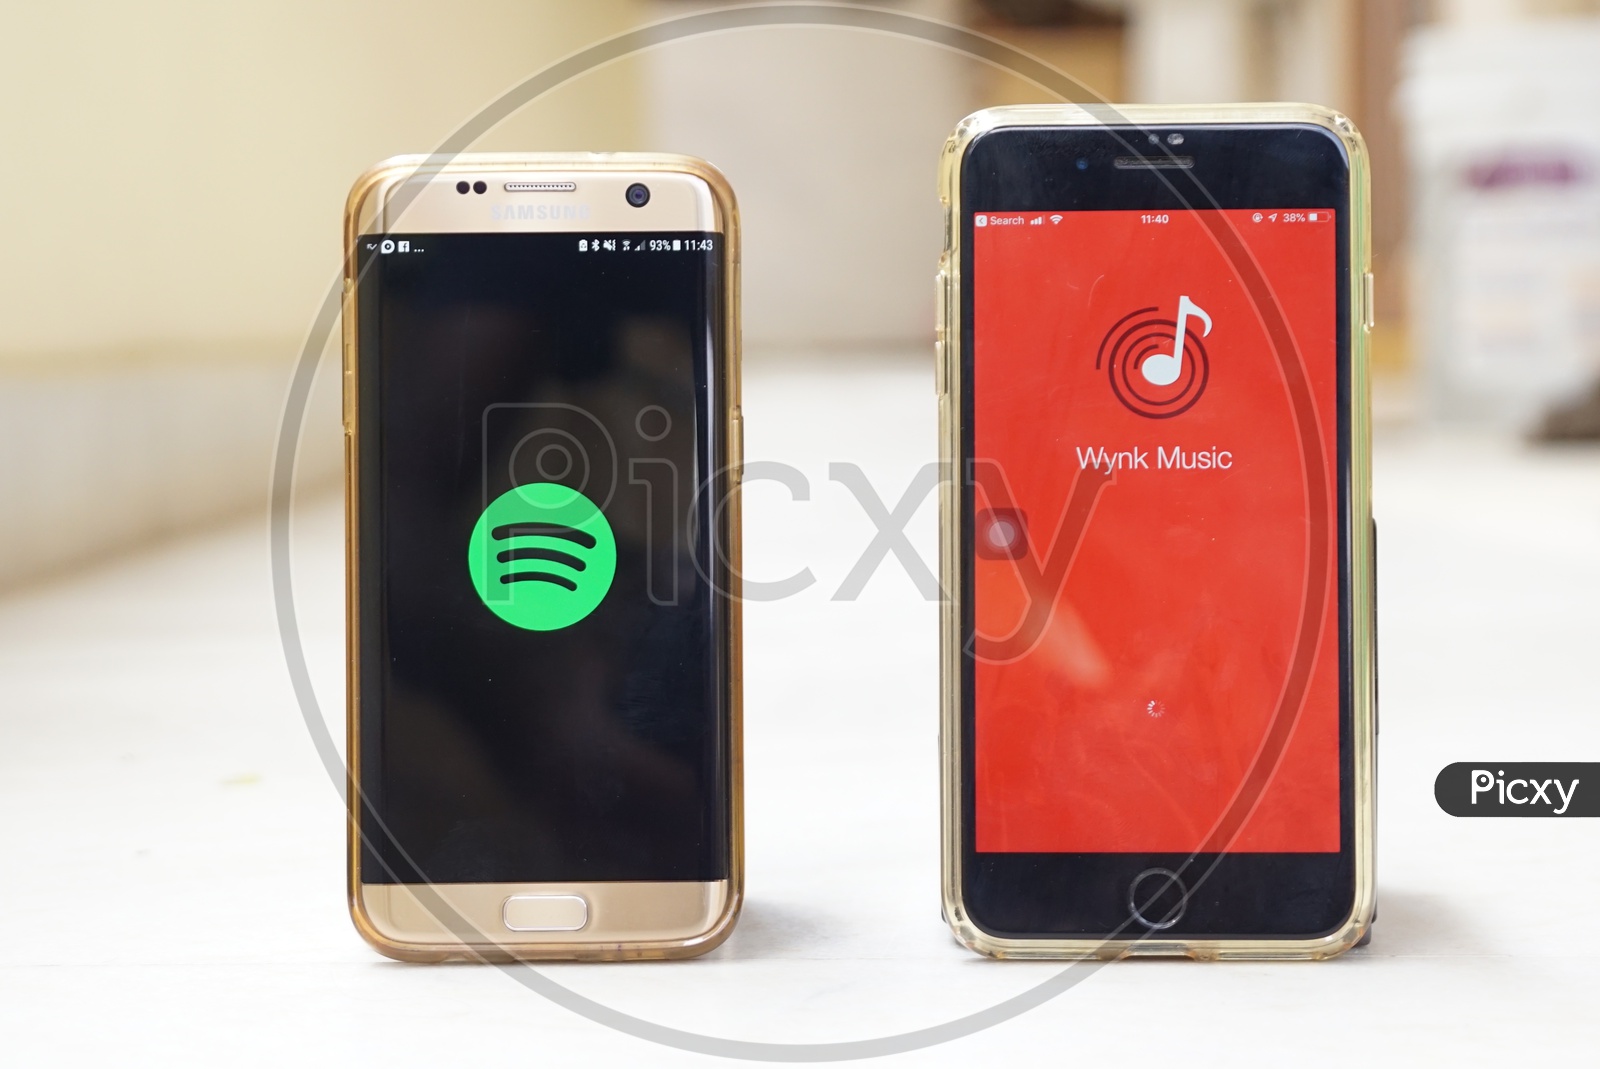 Smartphones with Spotify app and Wynk app on screen